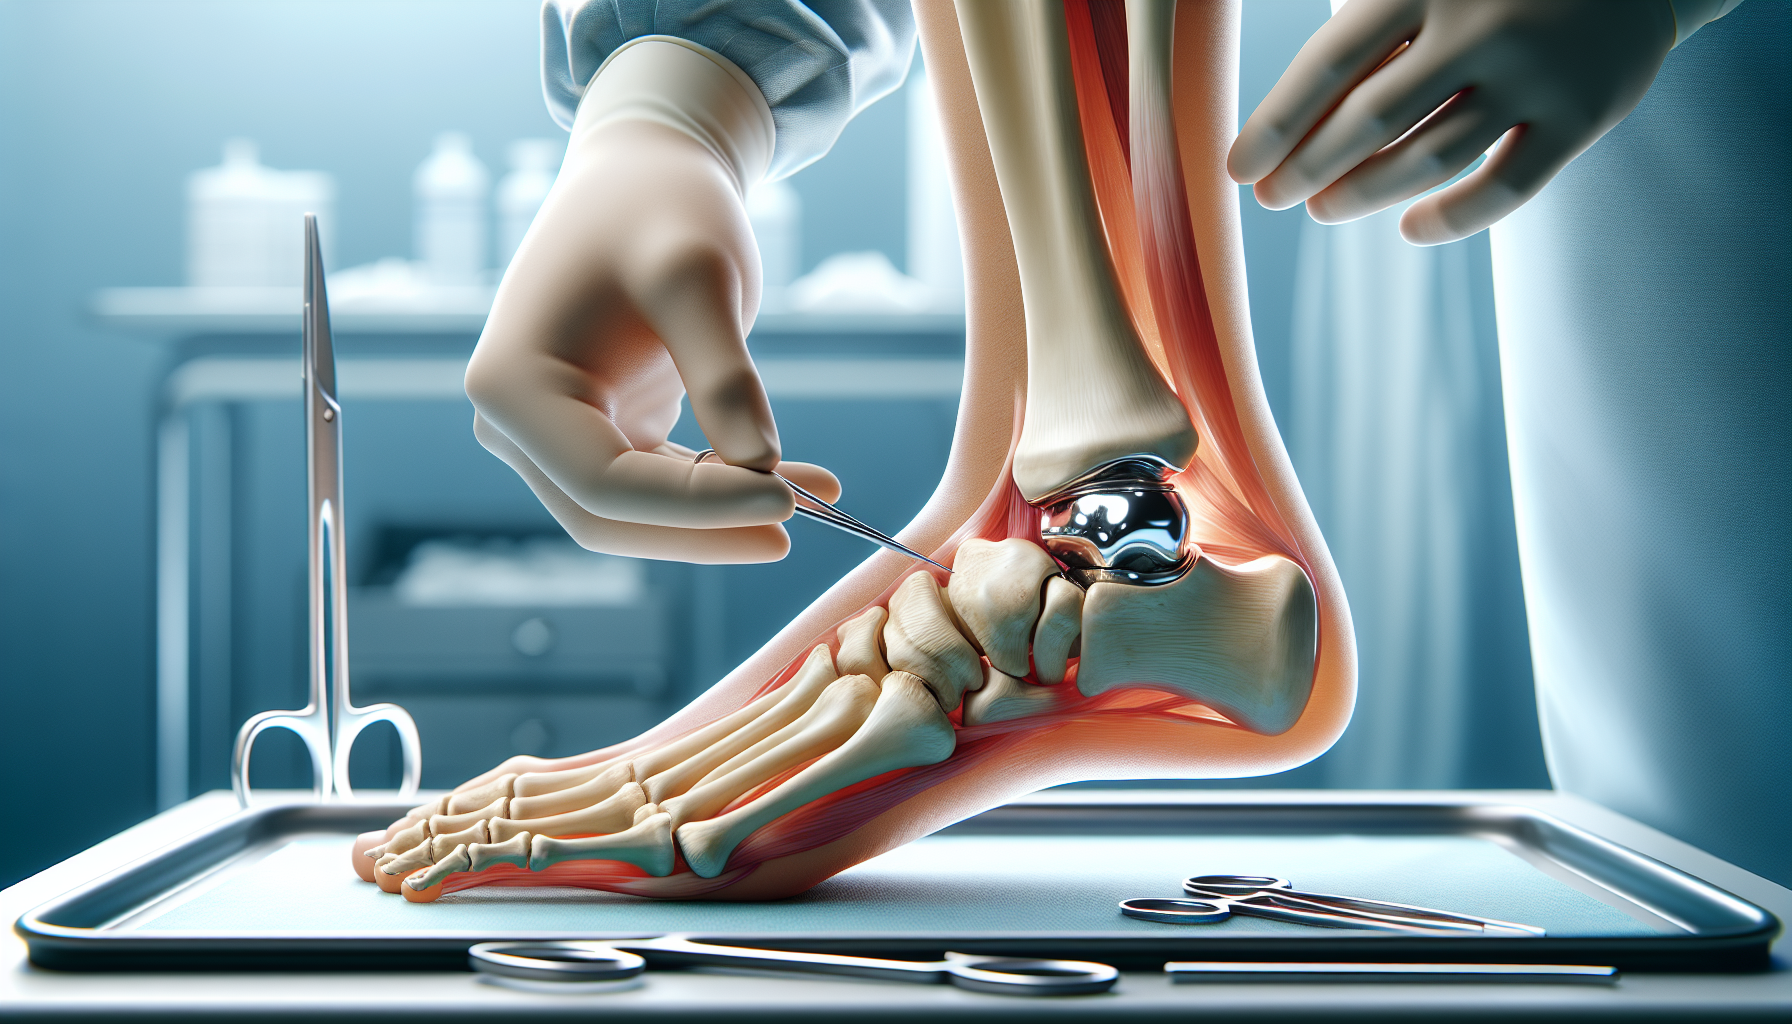 Illustration of joint replacement surgery for midfoot arthritis